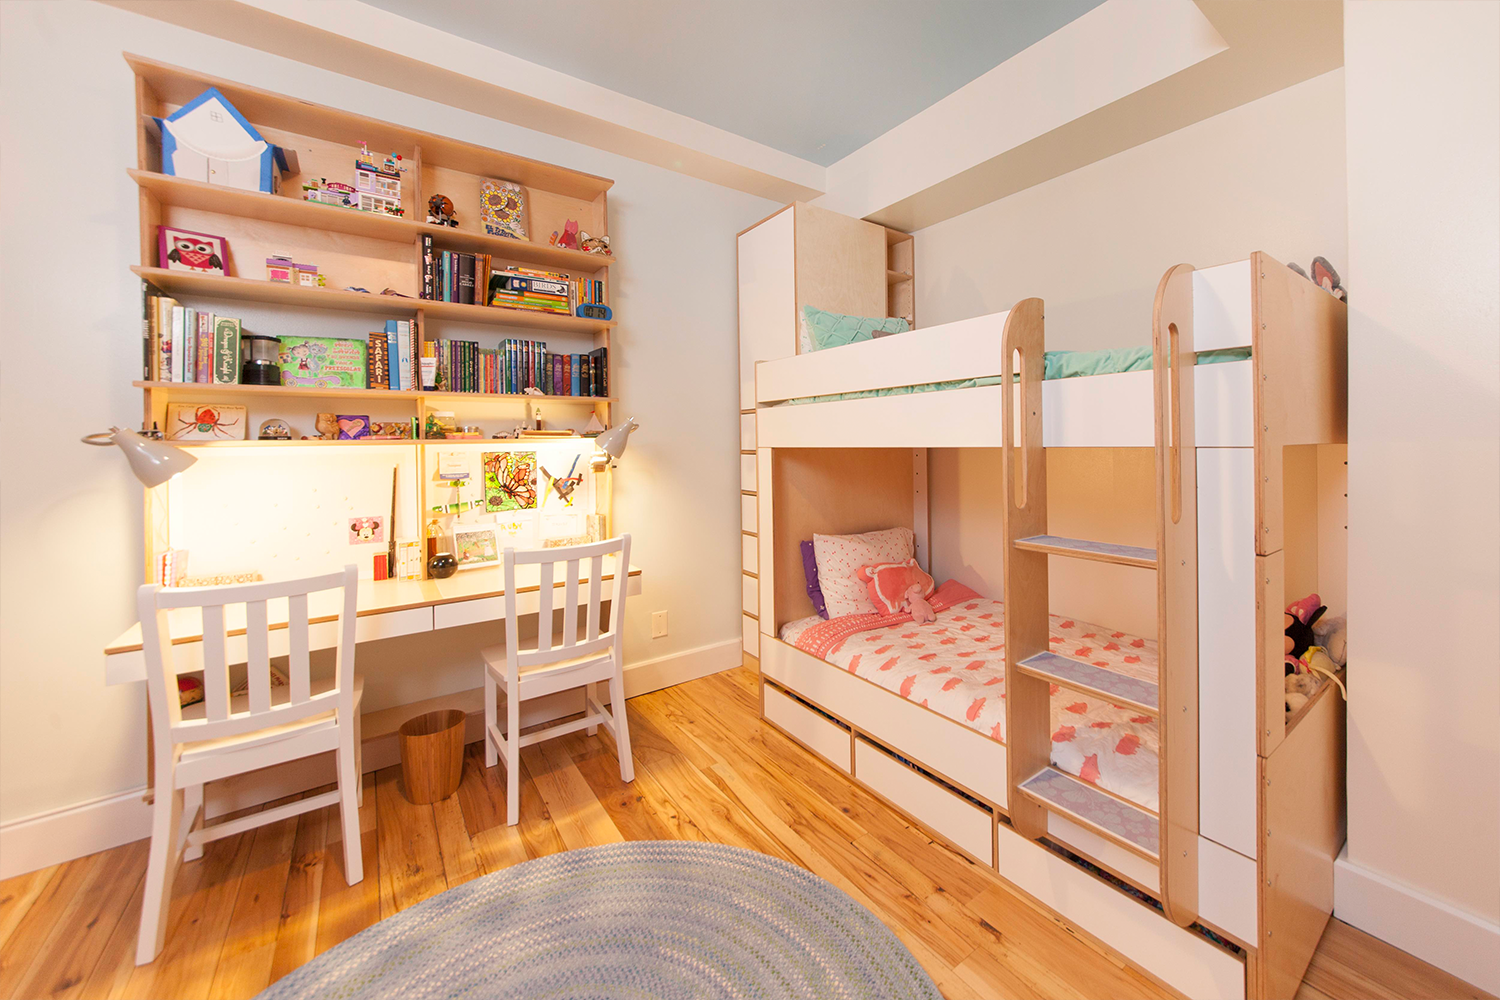 Cozy children’s room with bunk beds, study area, bookshelves, and warm lights.